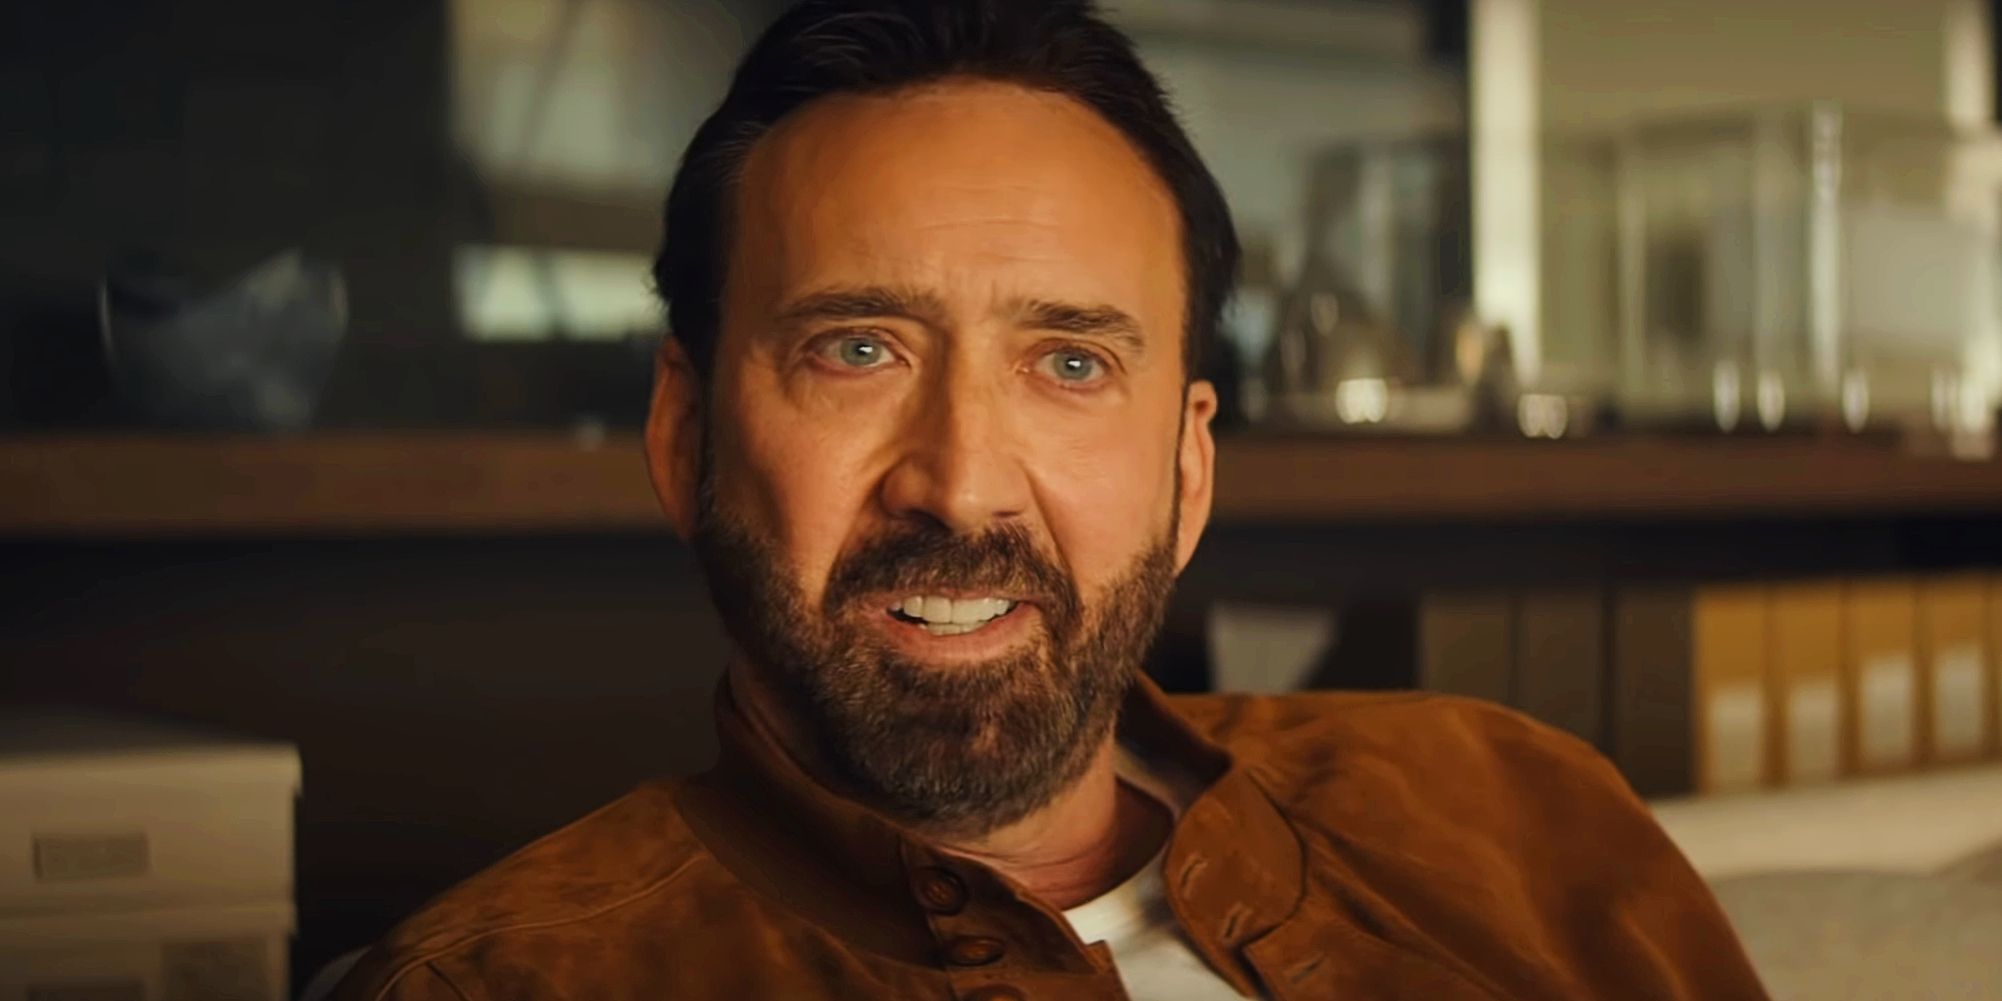 Nicolas Cage Reveals The One Role He'd Still Love To Play